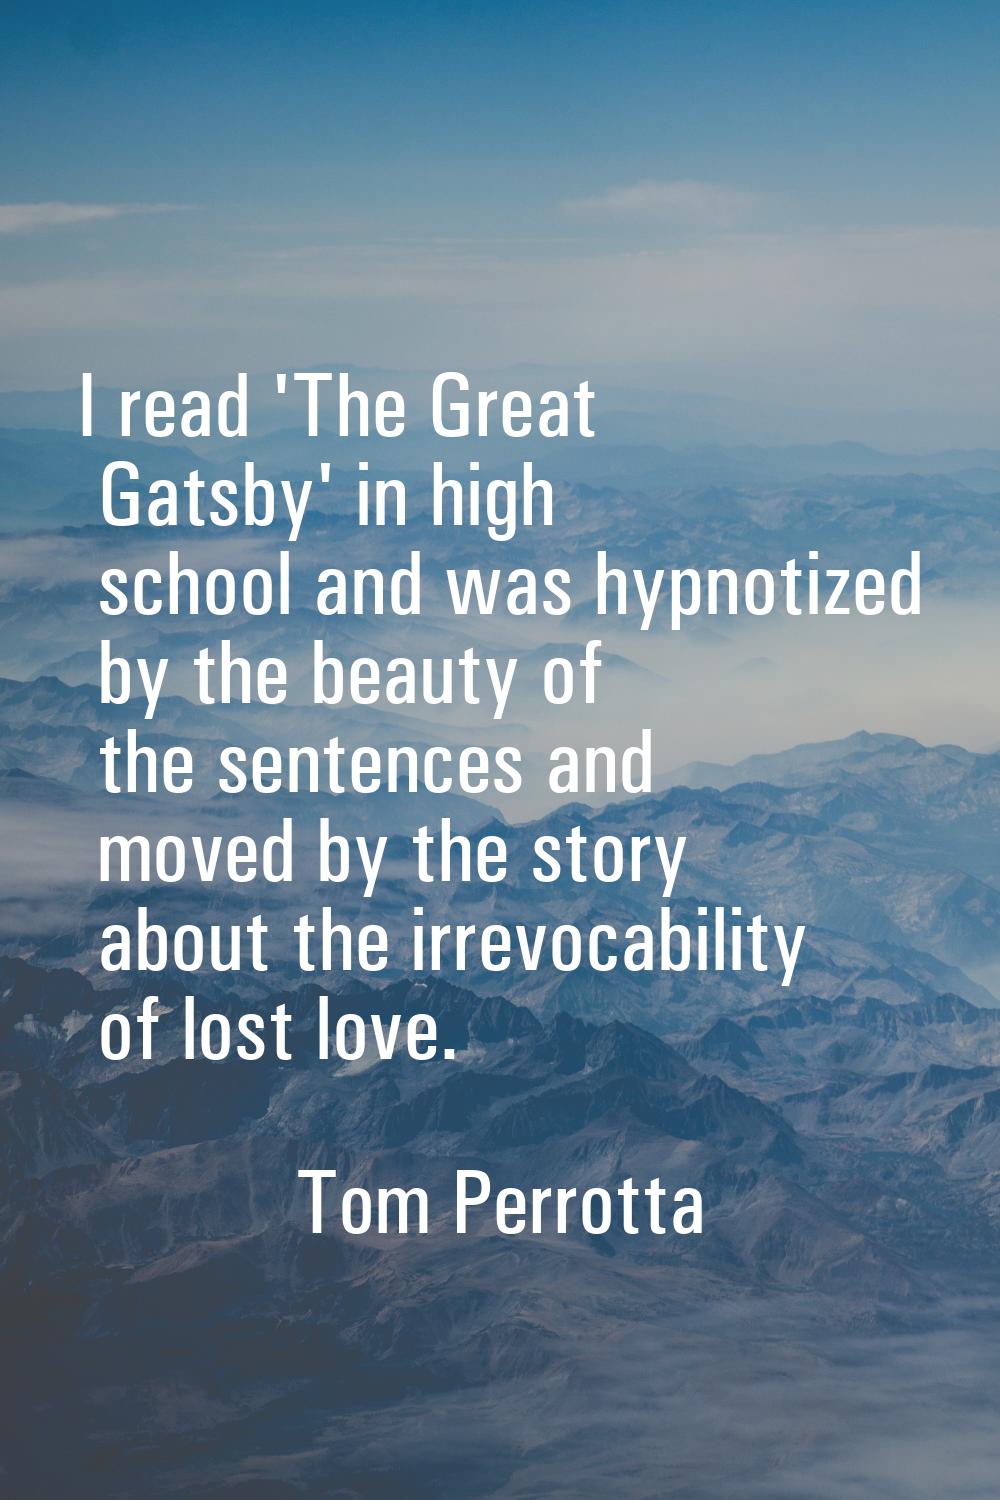 I read 'The Great Gatsby' in high school and was hypnotized by the beauty of the sentences and move